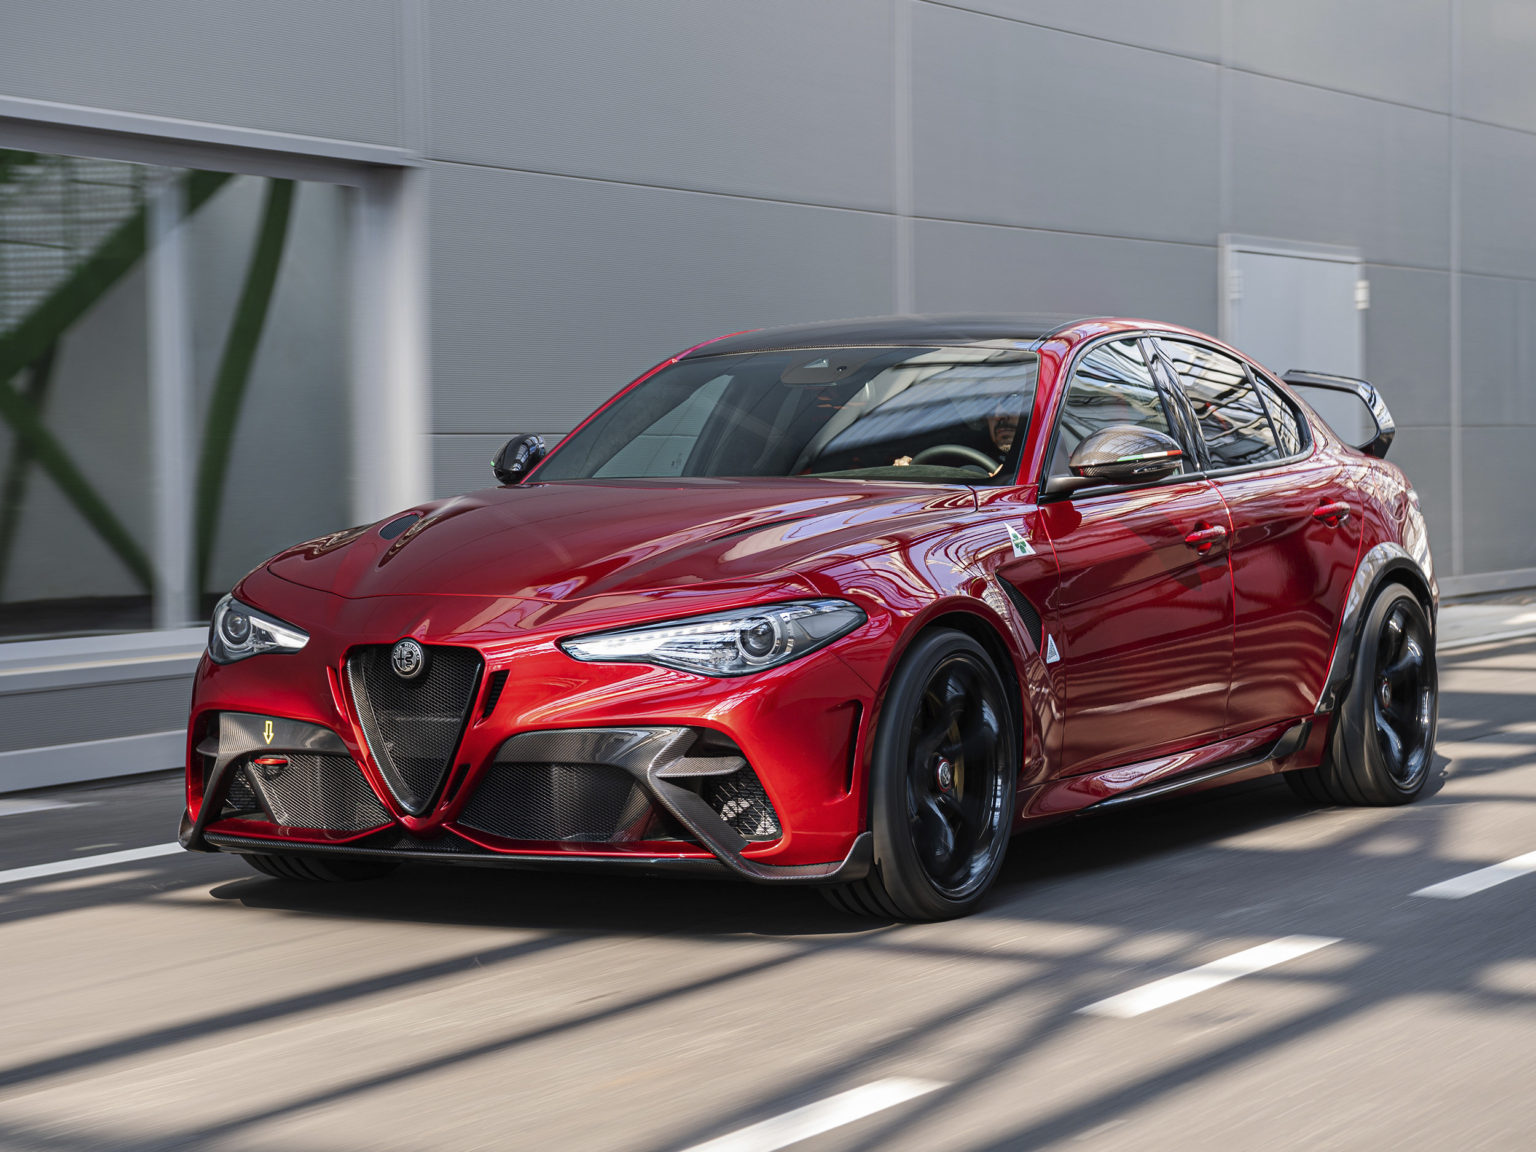 The Alfa Romeo Giulia is one of the models that can be found on the new CPO website.